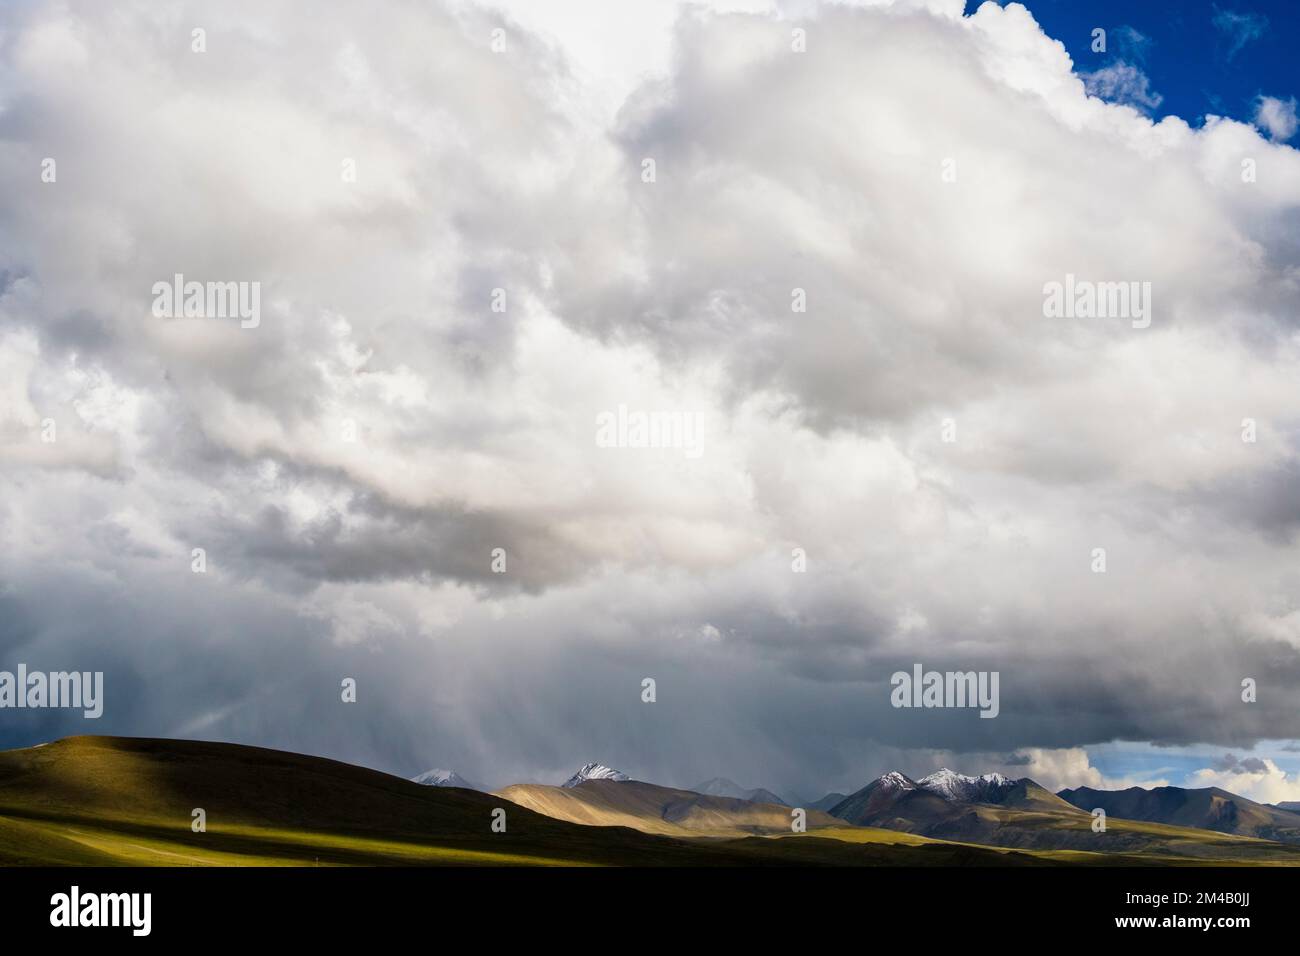 View of the Tibetan plateau with snow-capped mountains in the background. Tibet Autonomous Region. China. Stock Photo